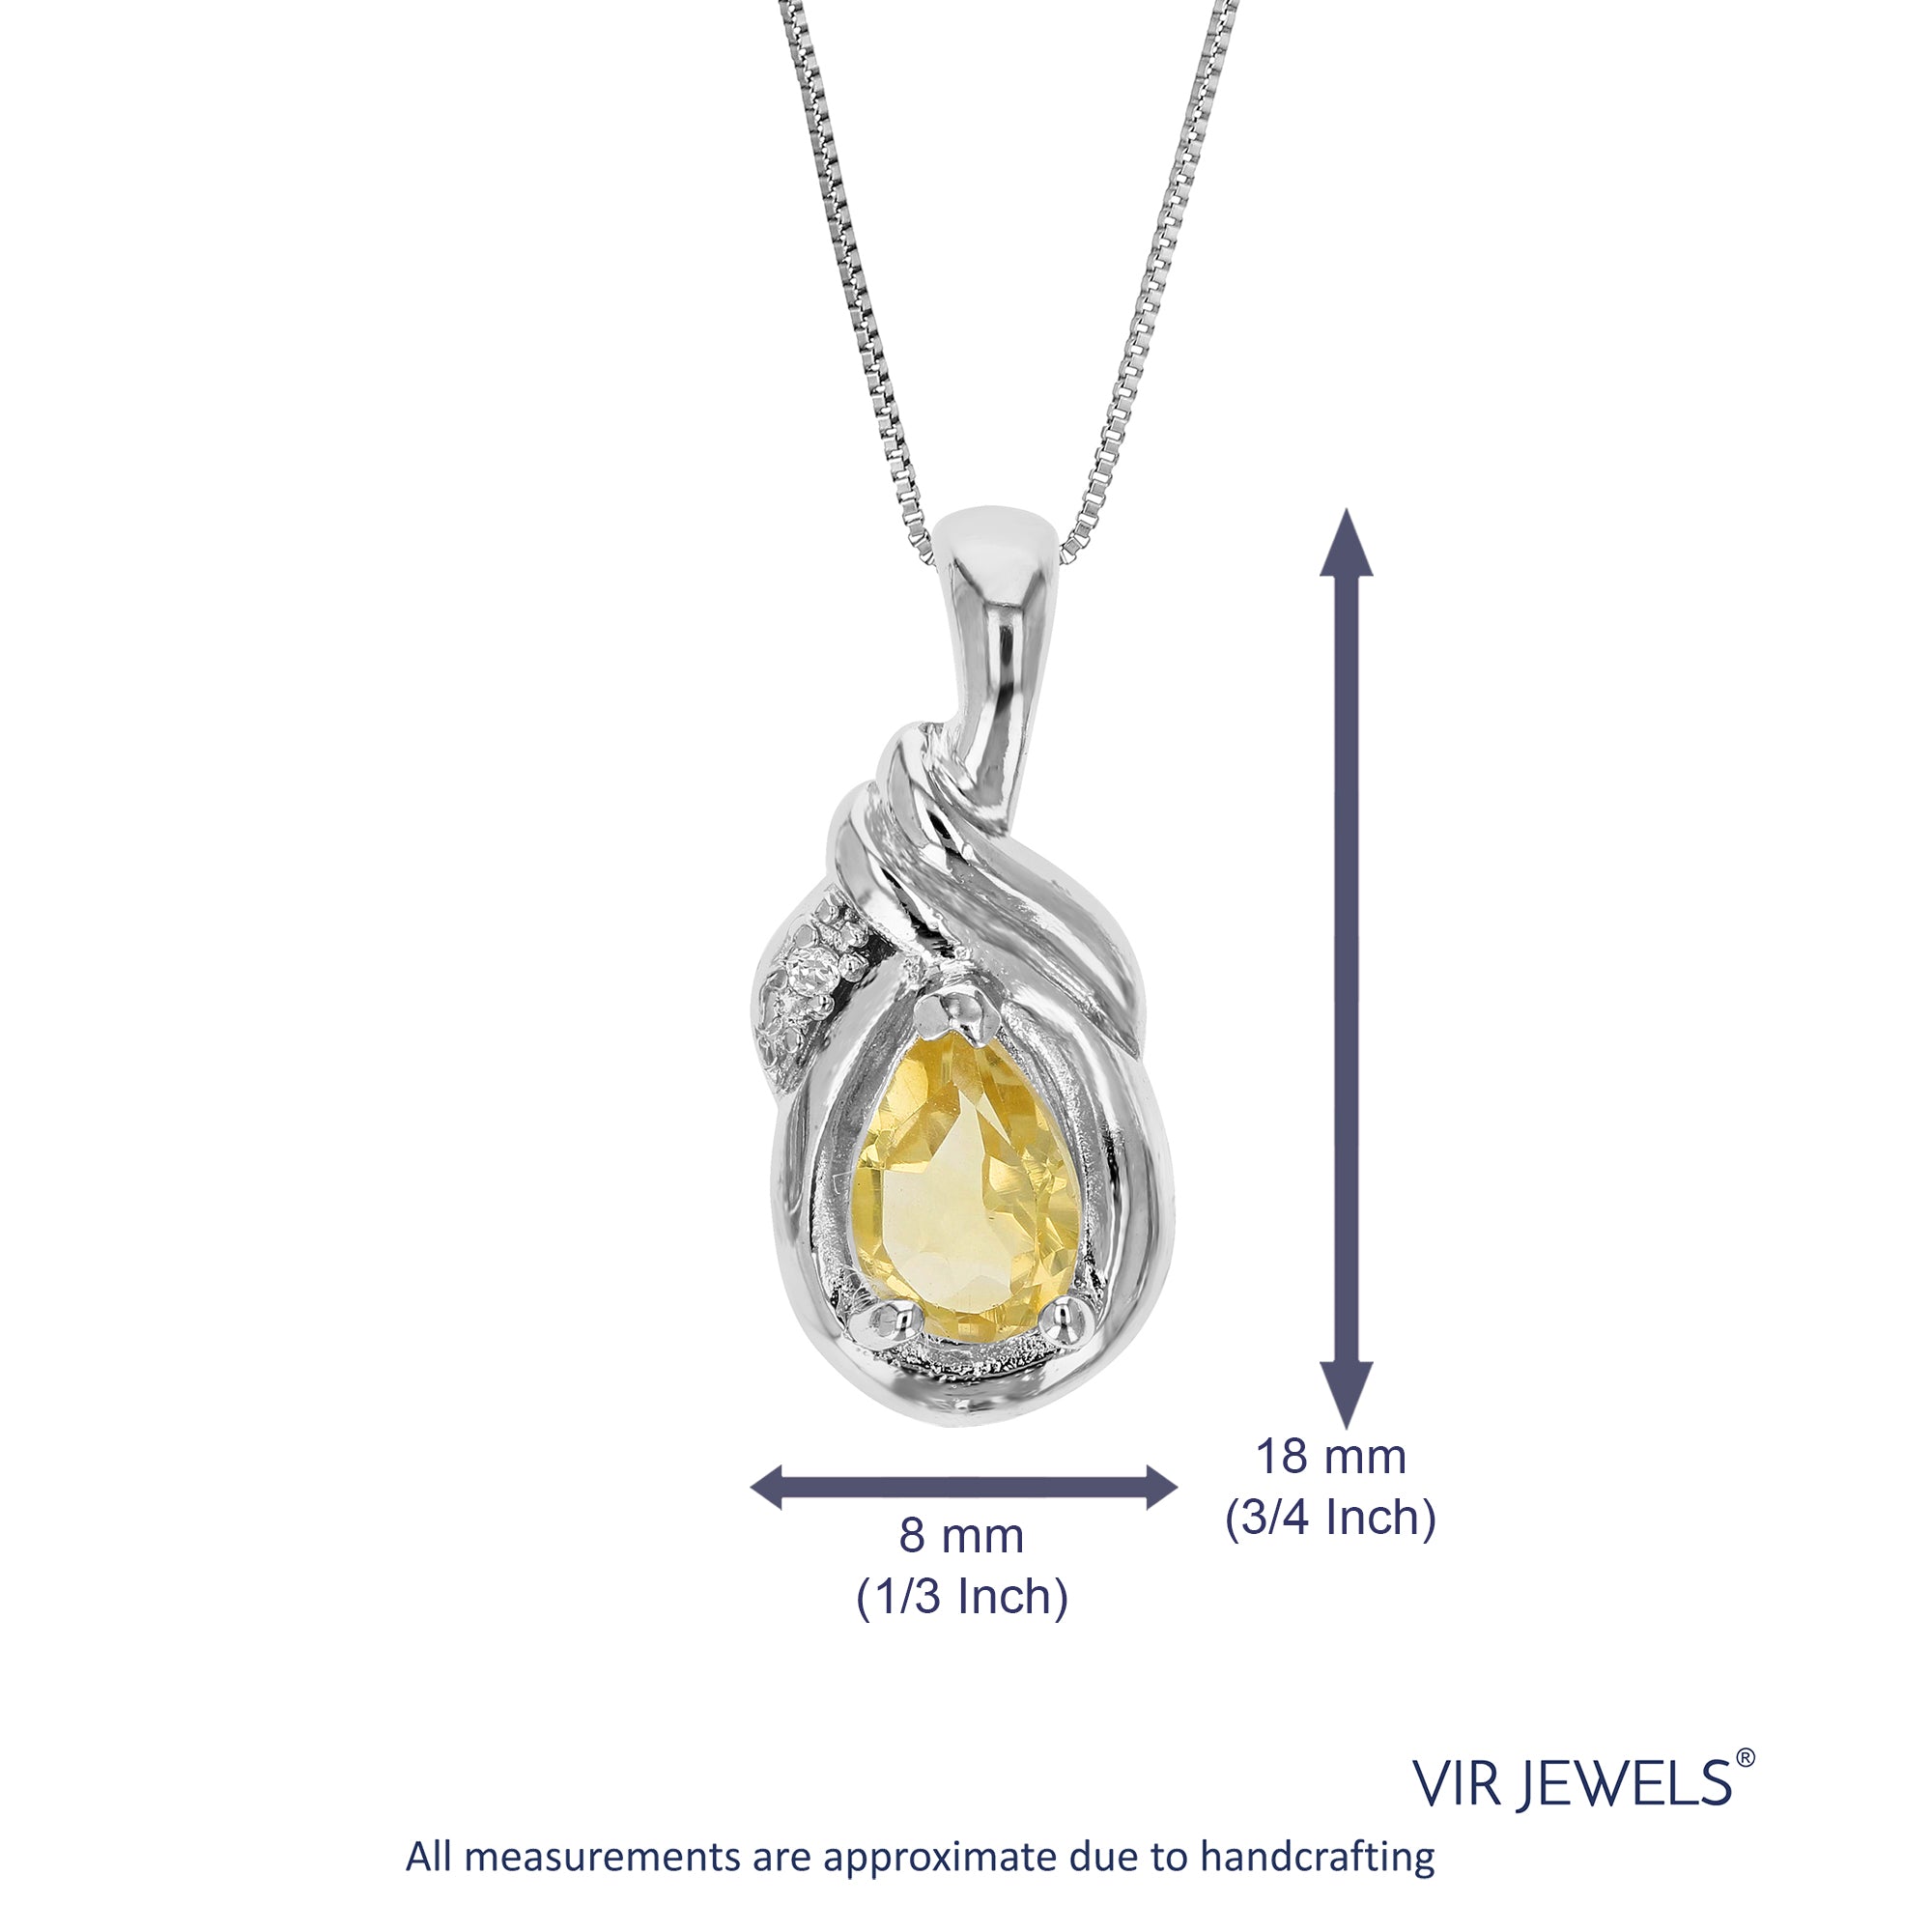 0.45 cttw Pendant Necklace, Citrine Pear Shape Pendant Necklace for Women in .925 Sterling Silver with Rhodium, 18 Inch Chain, Prong Setting